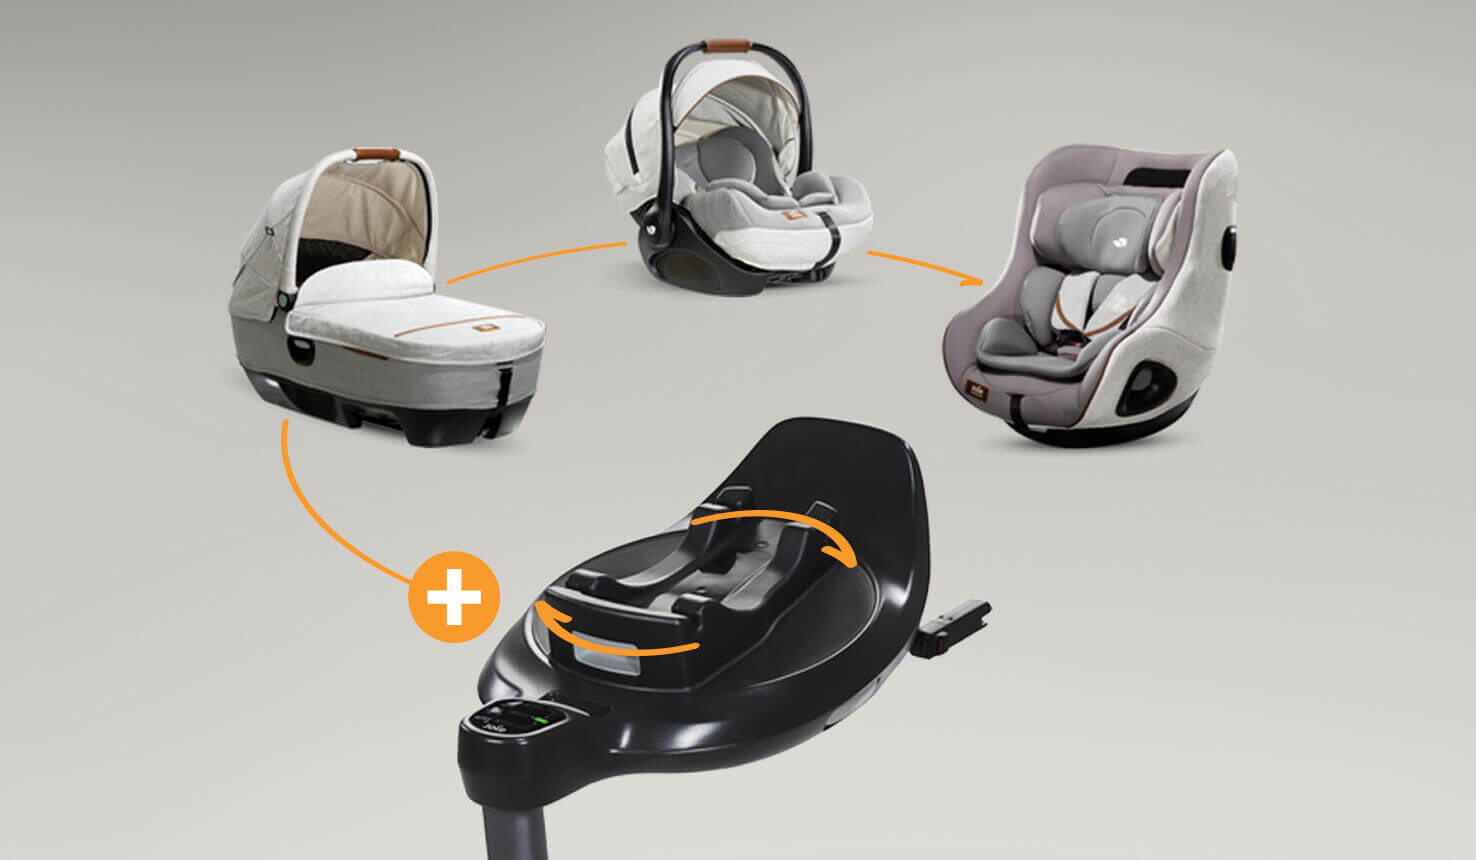 Calmi r129 is part of the encore spinning system by pairing with the I base encore and the I harbour toddler seat to grow from birth to four years